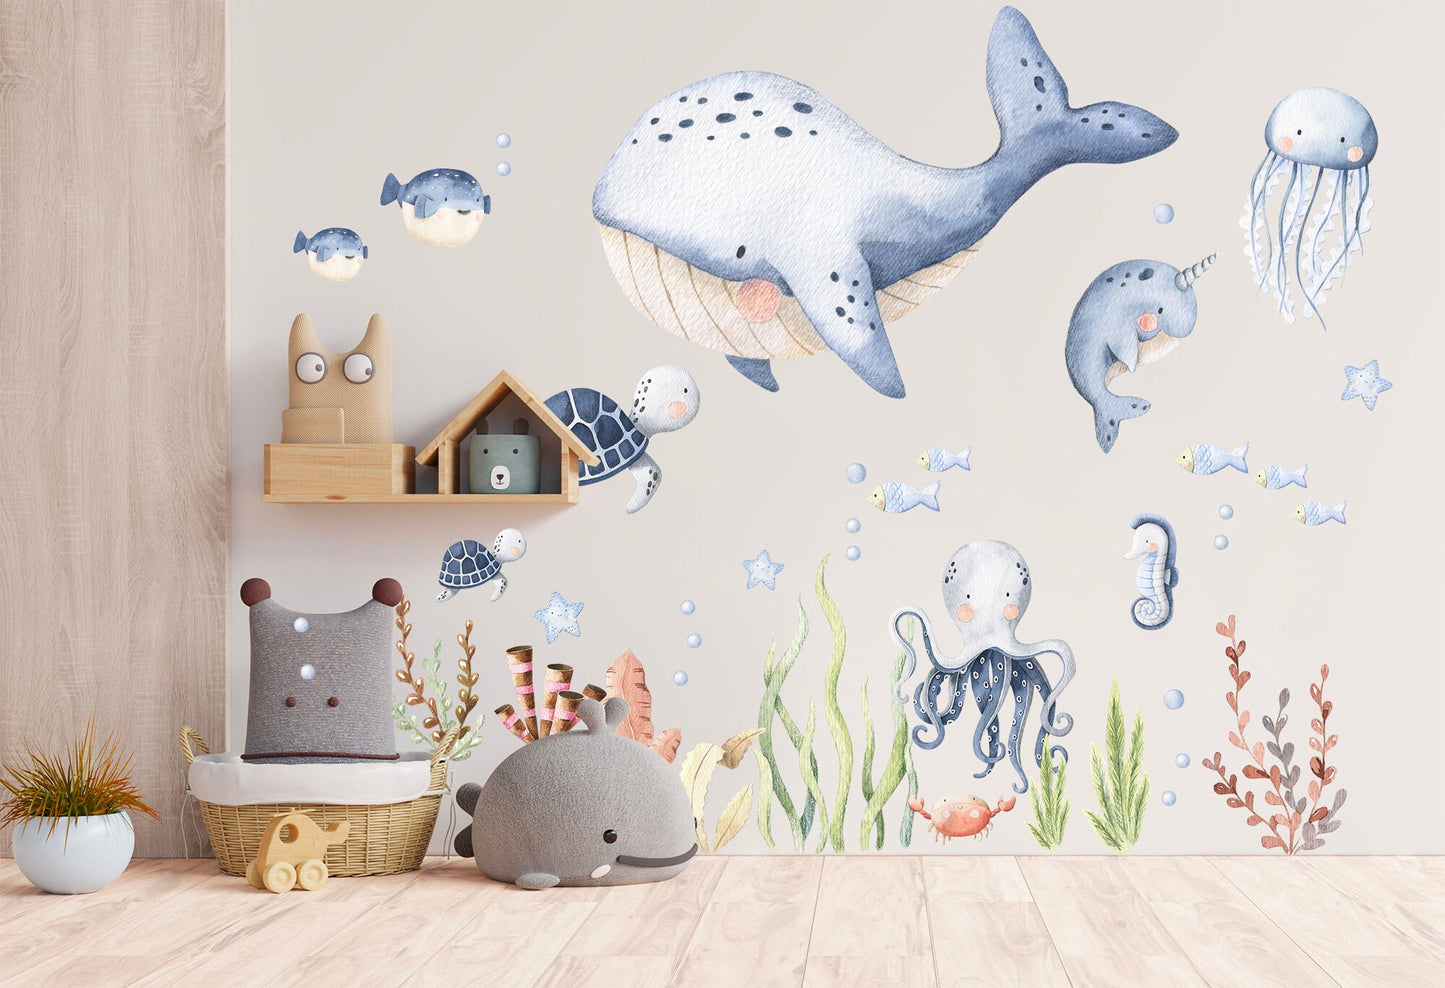 Underwater World Baby Marine Life Wall Decal - Orca Narwhal Sea Turtle Octopus Jellyfish Seahorse Seaweed - BR095